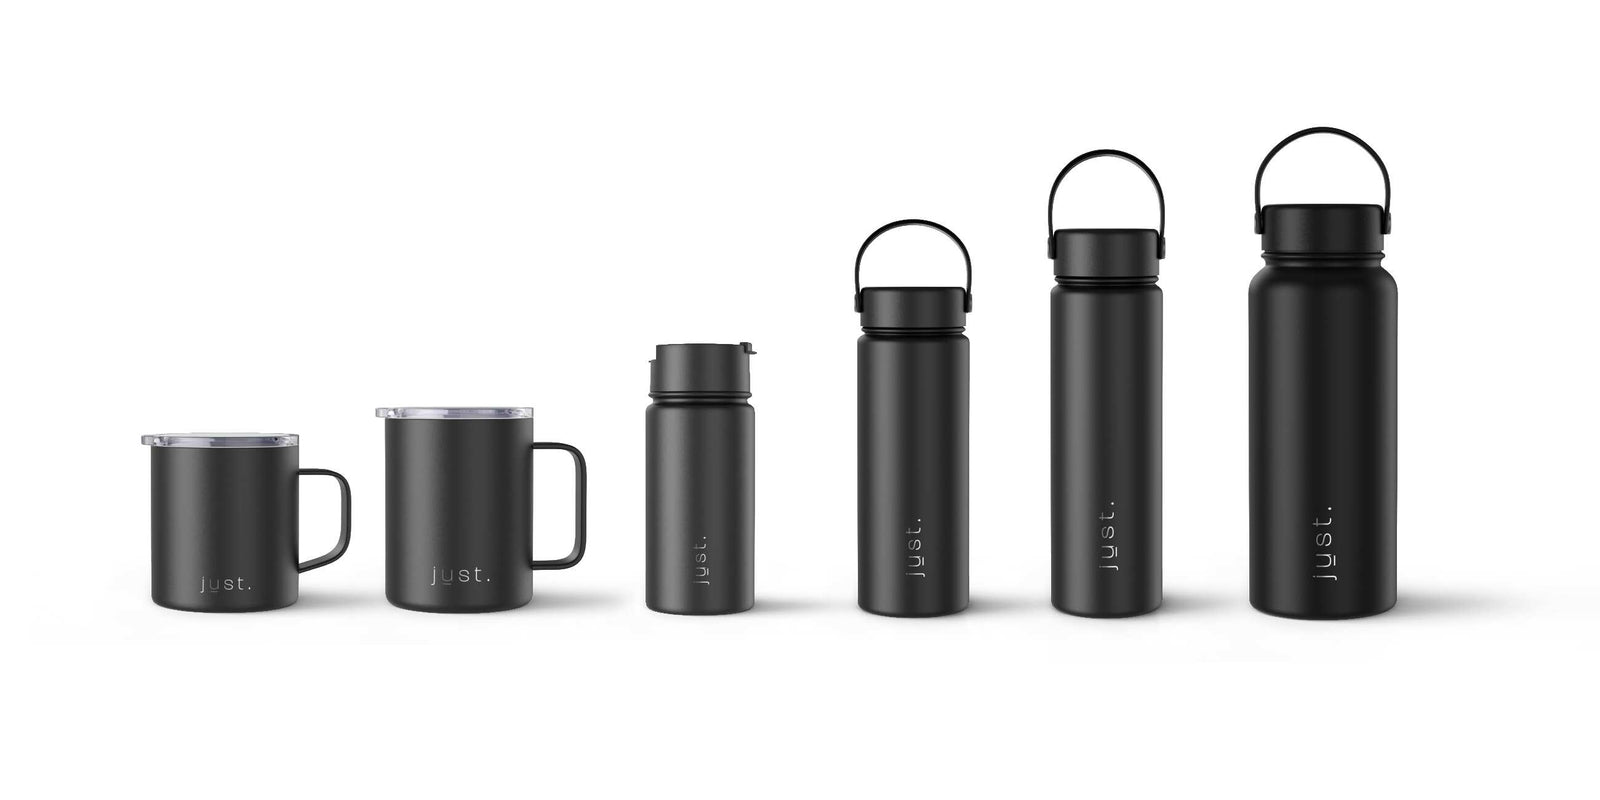 reusable water bottles, coffee cups and mugs